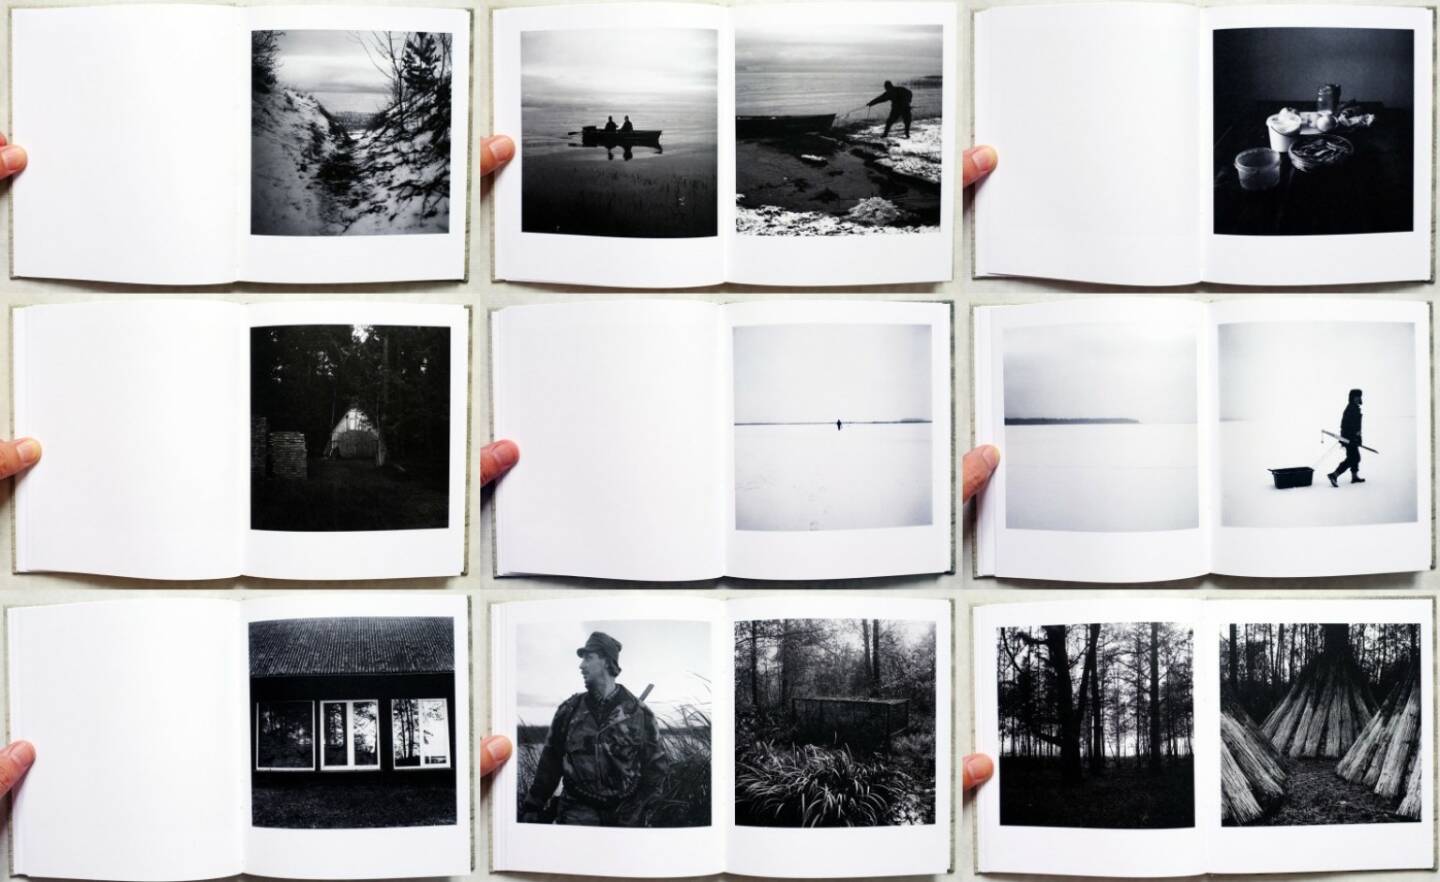 Karlis Bergs - Between the Lake and the Sea, Self published, 2014, Beispielseiten, sample spreads - http://josefchladek.com/book/karlis_bergs_-_between_the_lake_and_the_sea